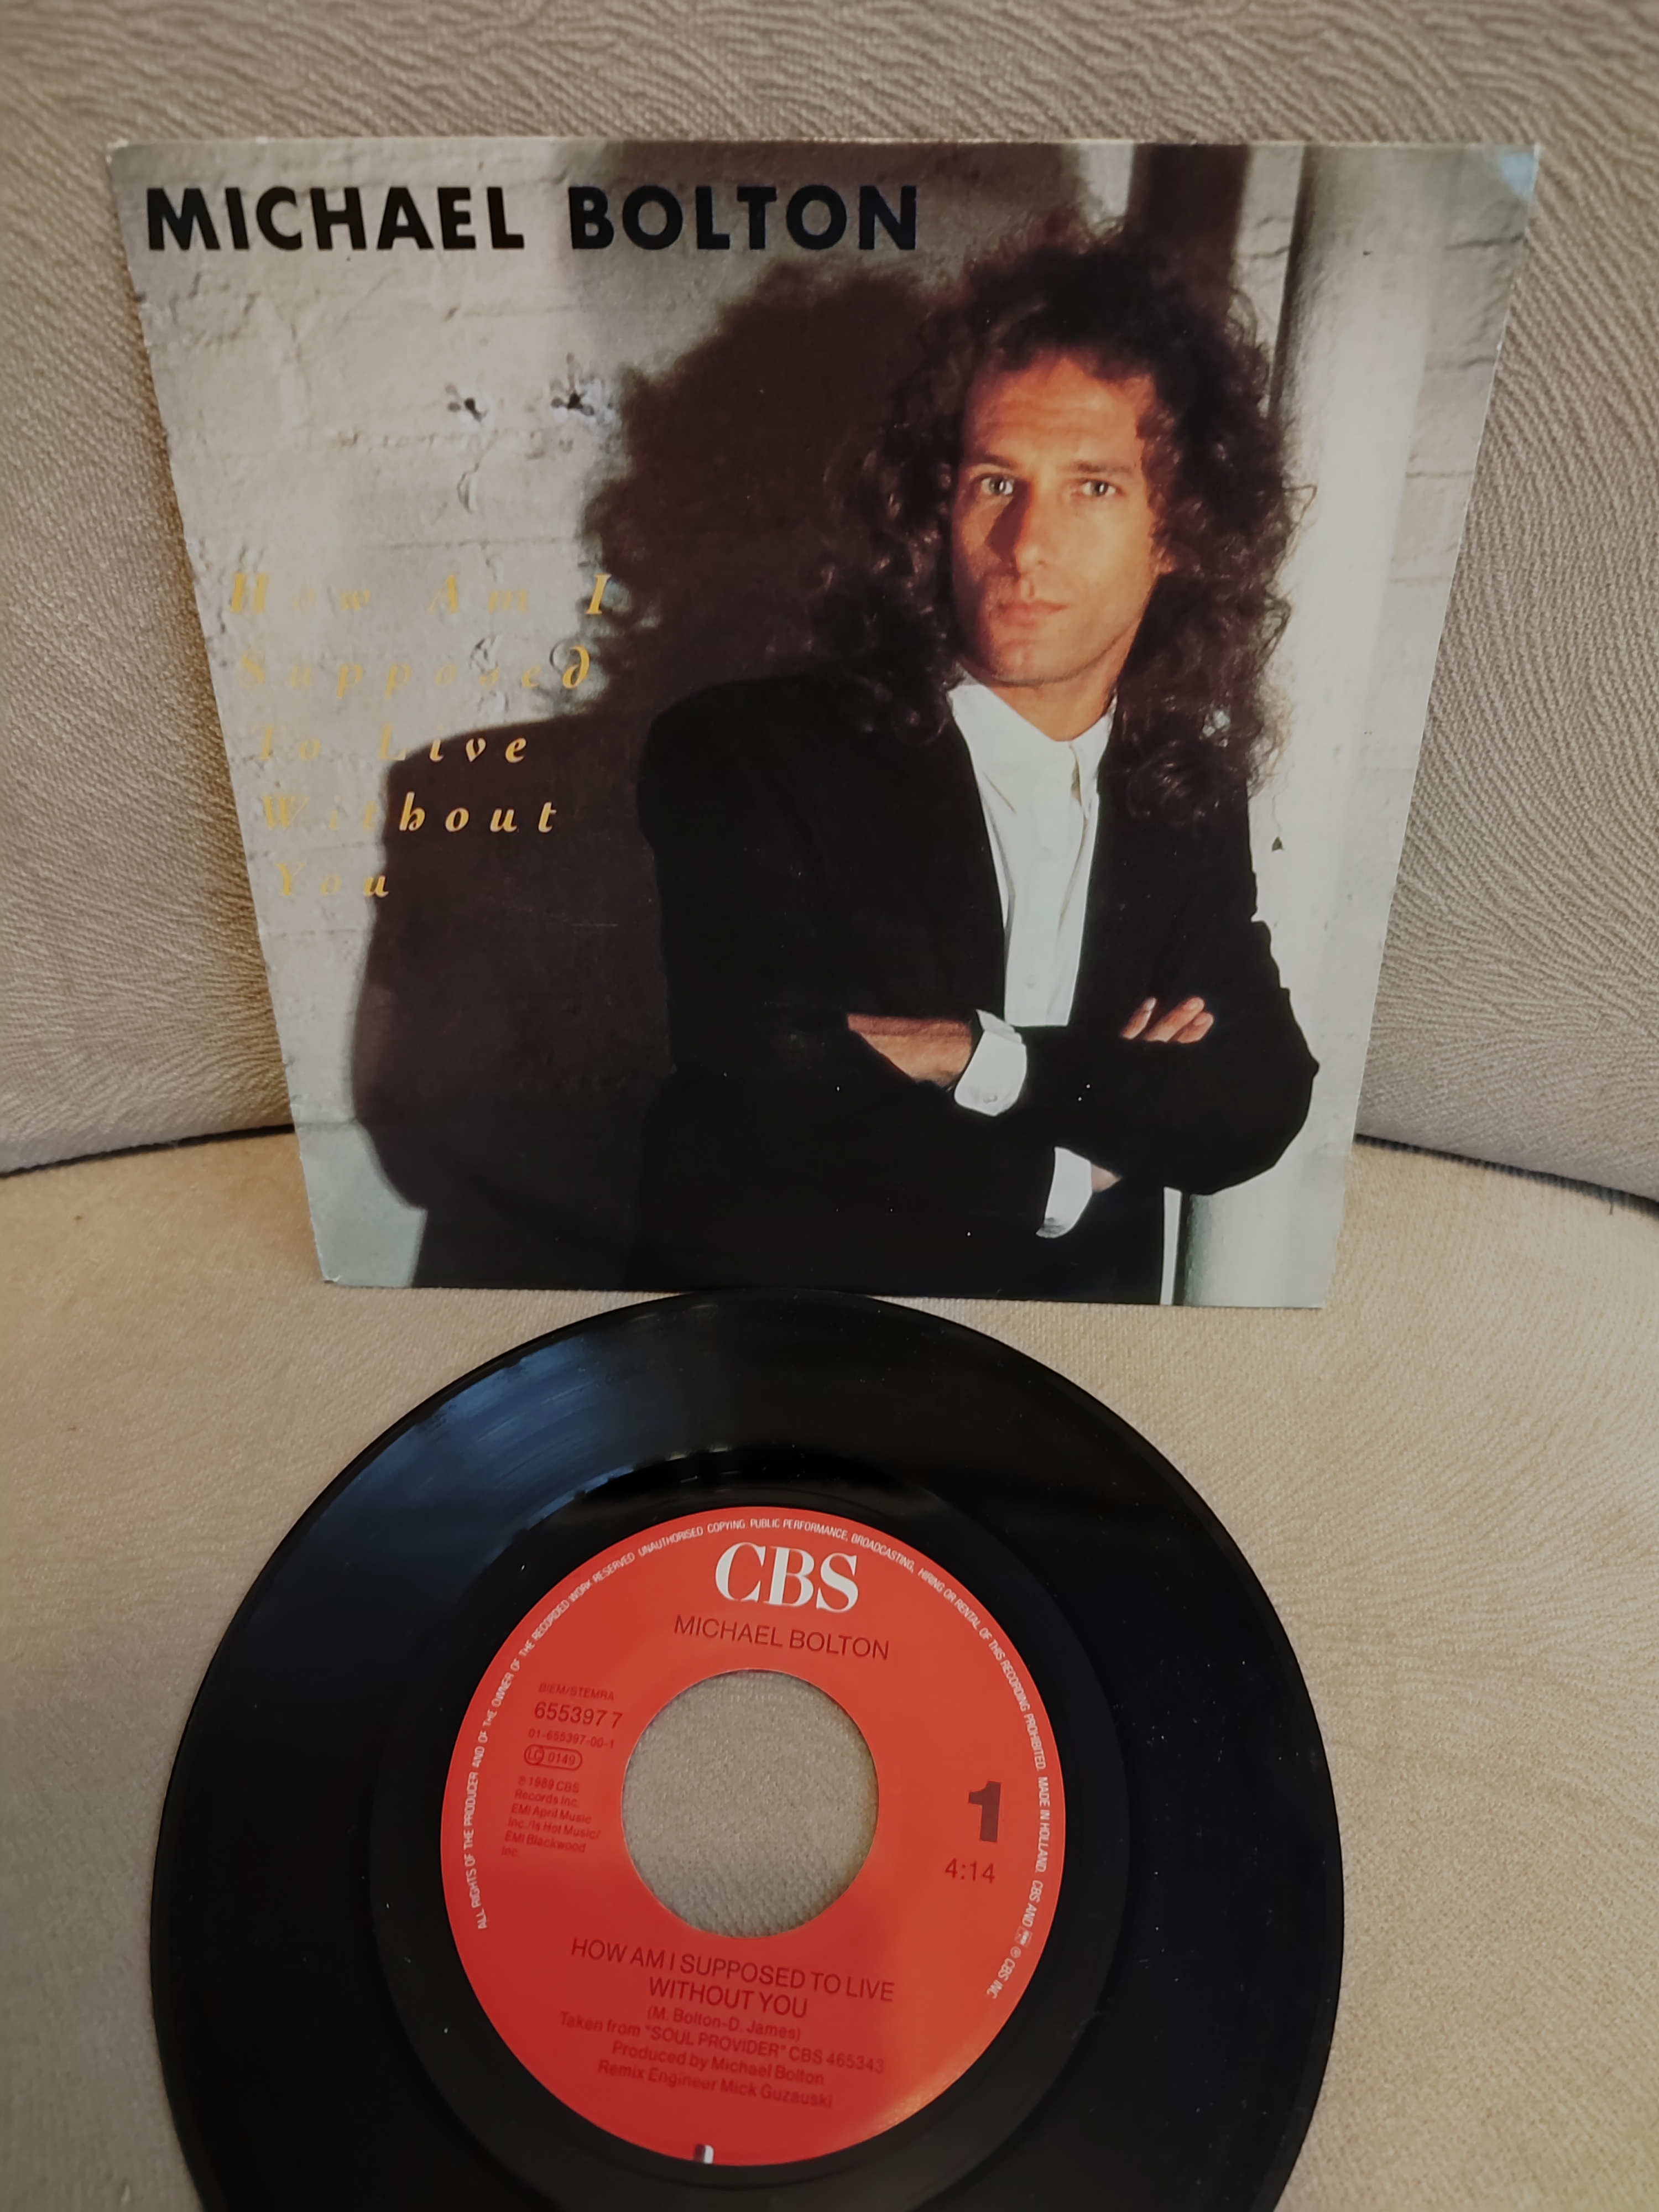 MICHAEL BOLTON - HOW AM I SUPPOSED TO LEAVE WITHOUT YOU - 1989 HOLLANDA BASIM 45 LİK PLAK 2. EL